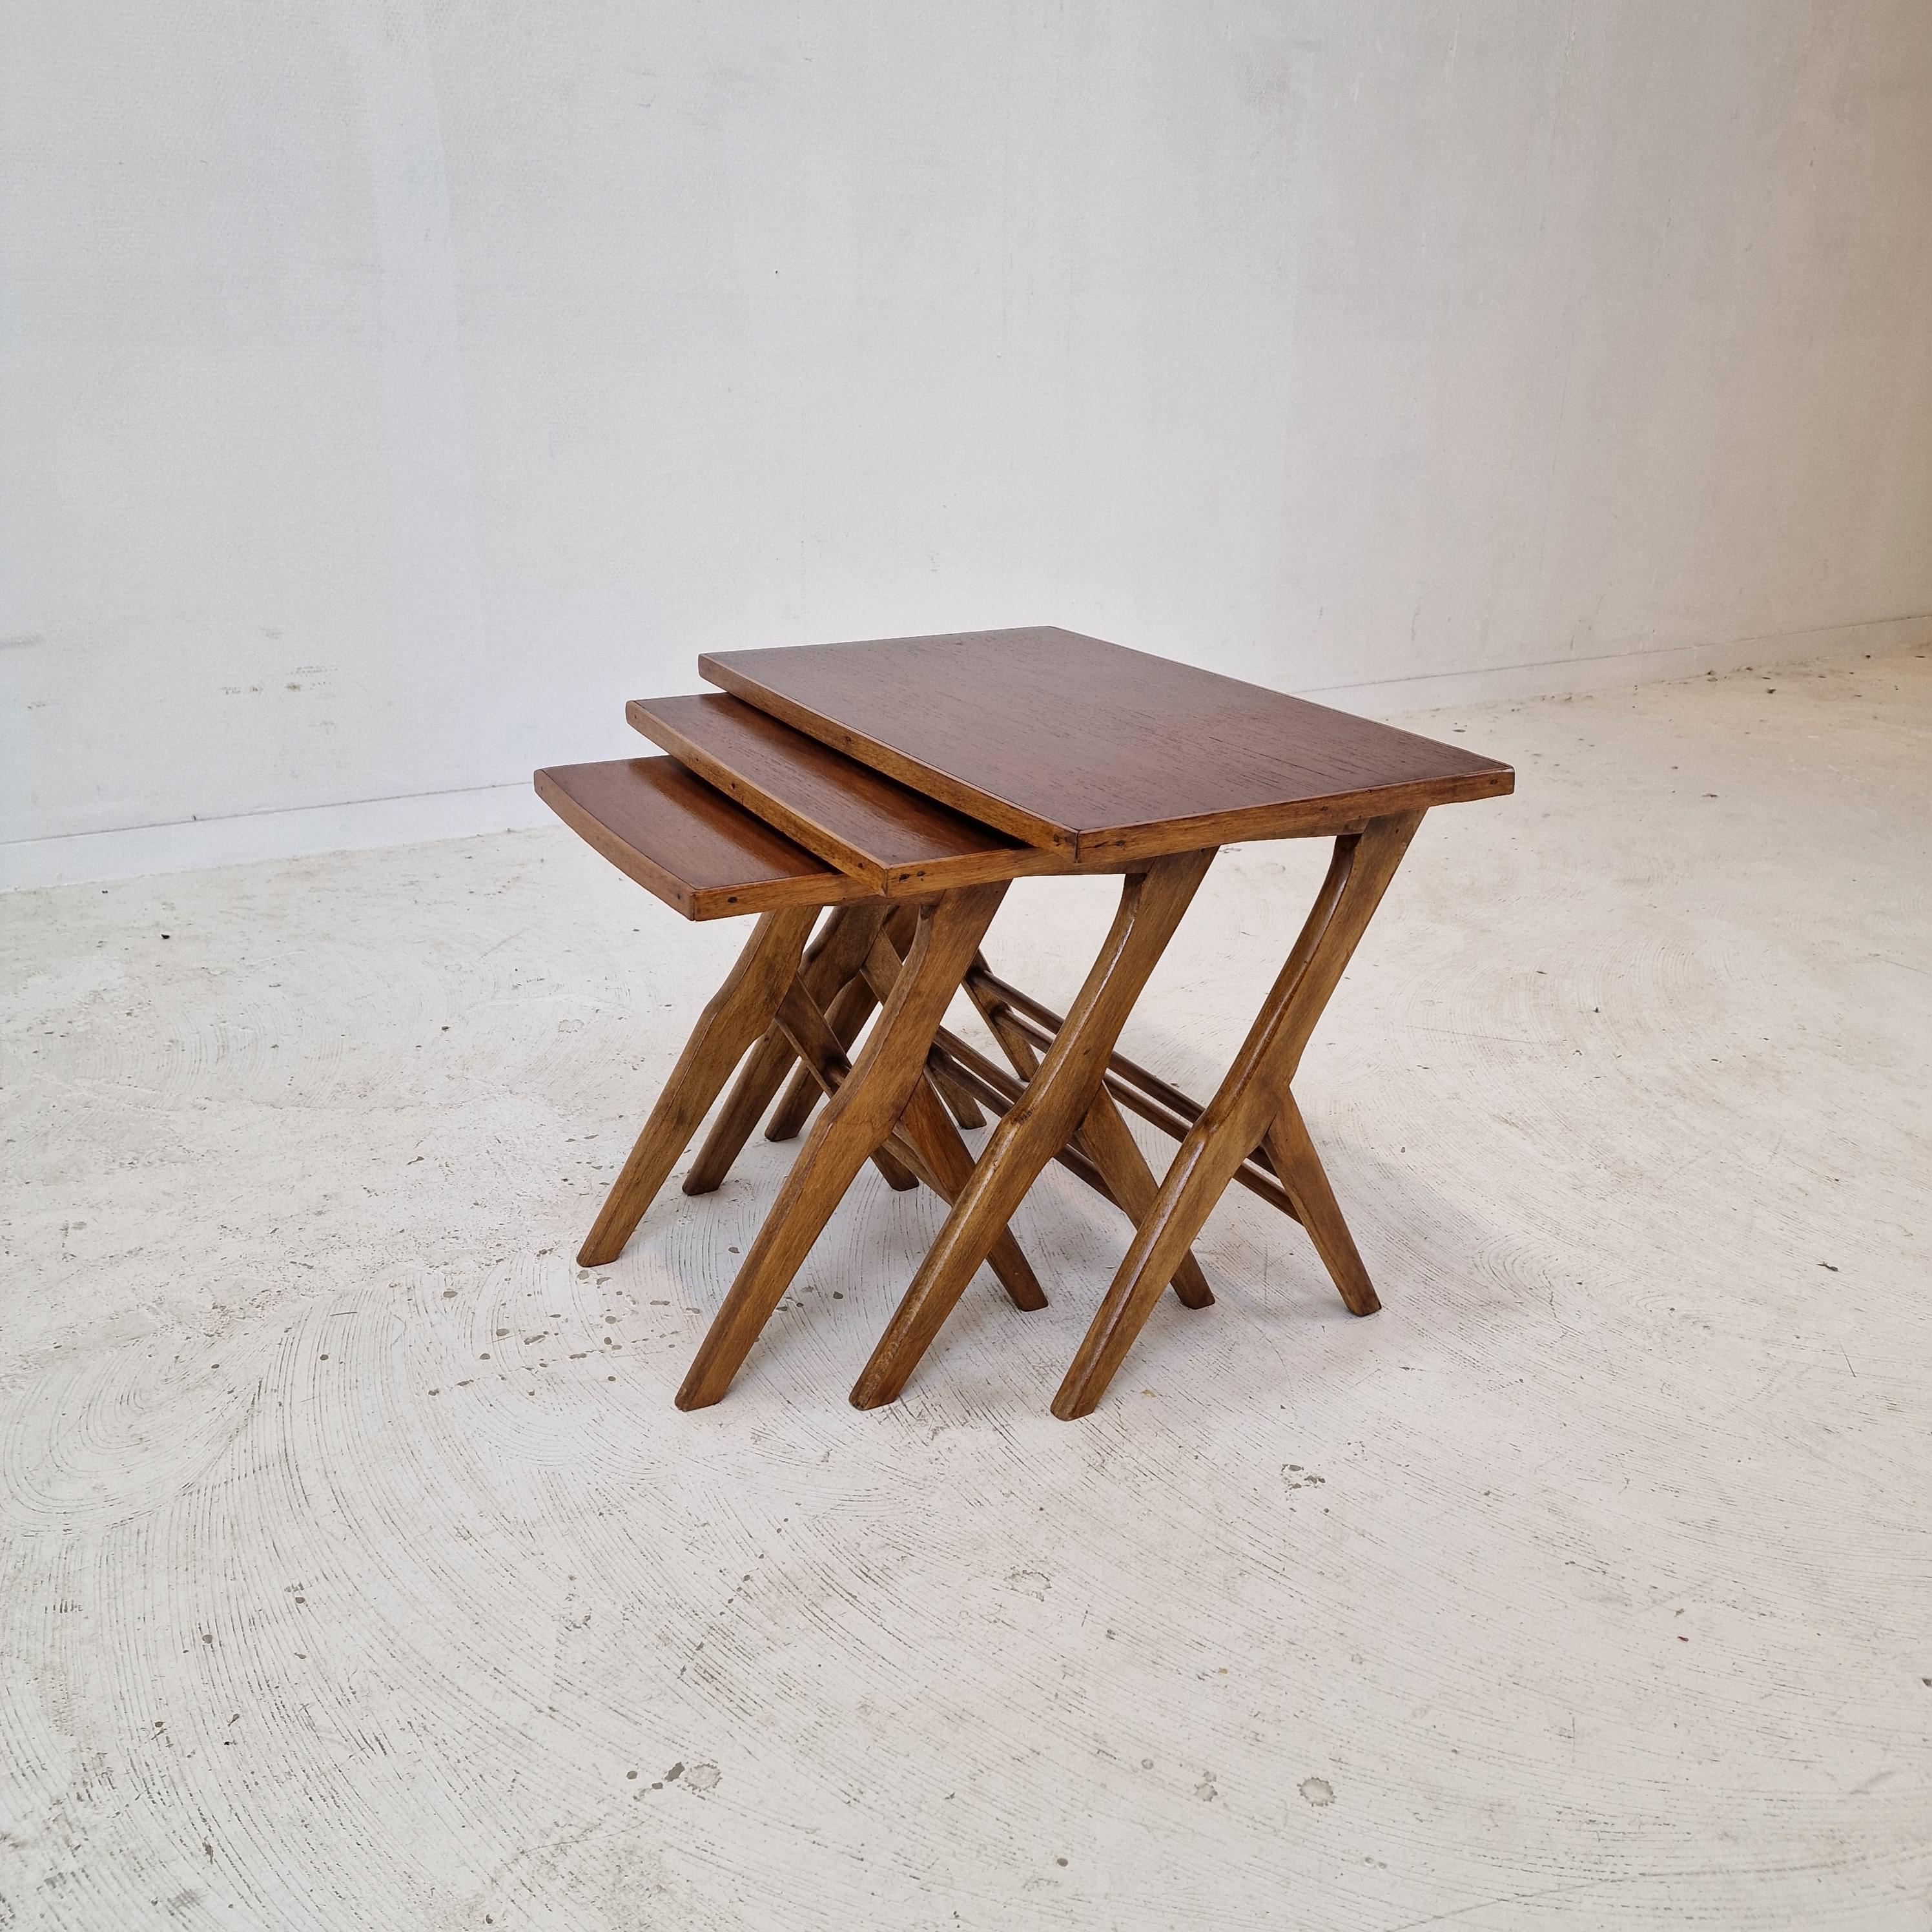 Set of 3 Wooden Nesting Tables, Holland 1960s For Sale 3